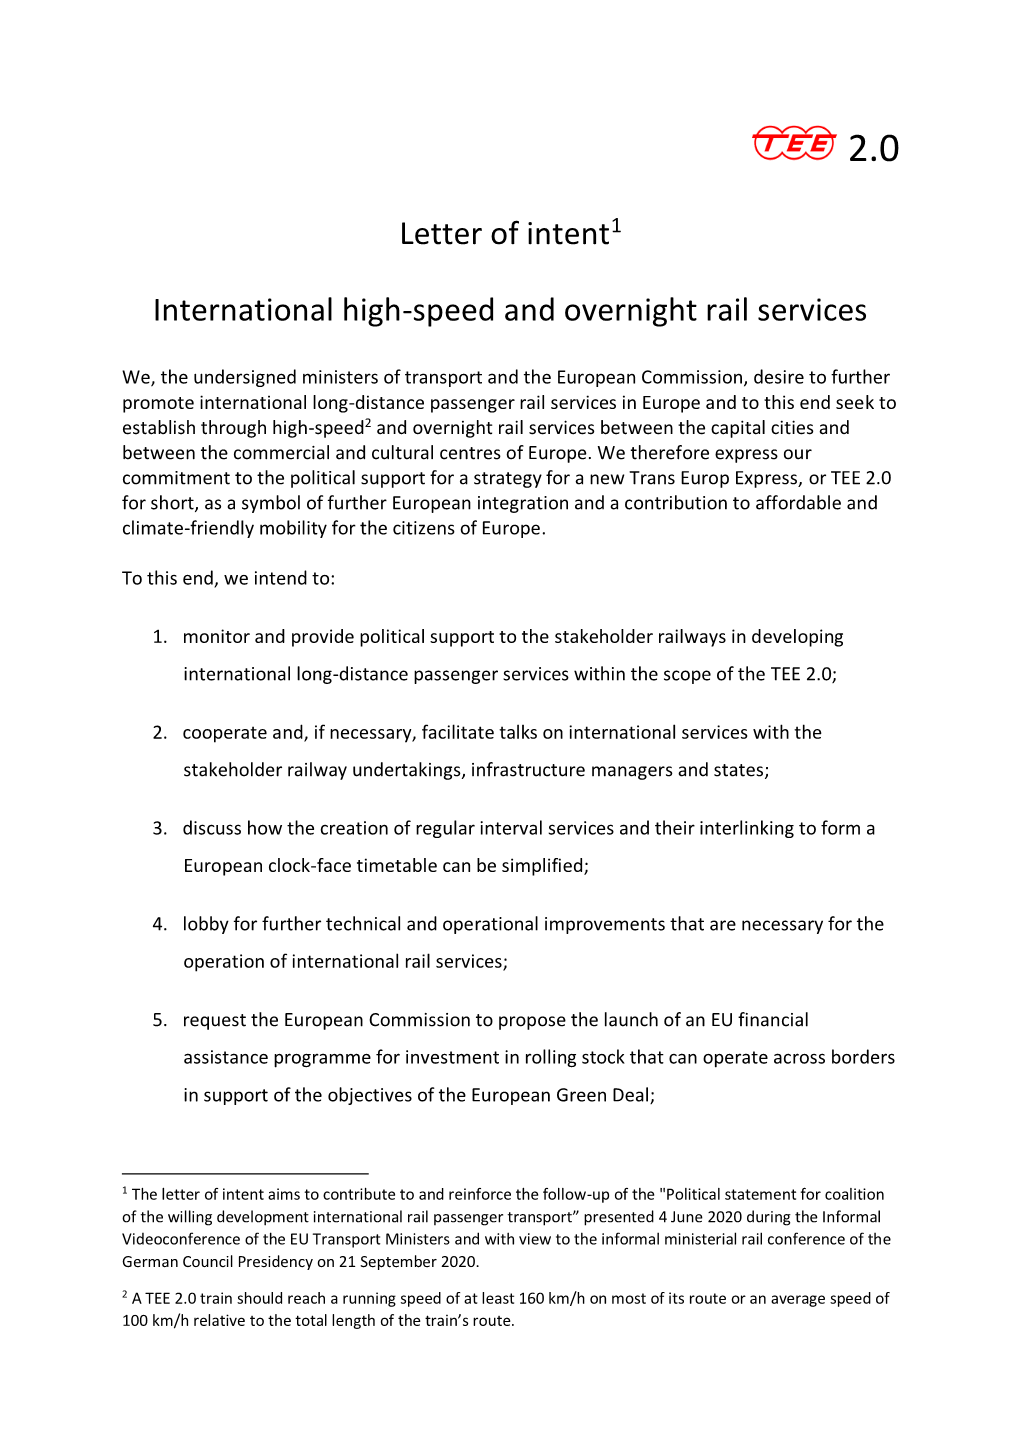 Letter of Intent1 International High-Speed And